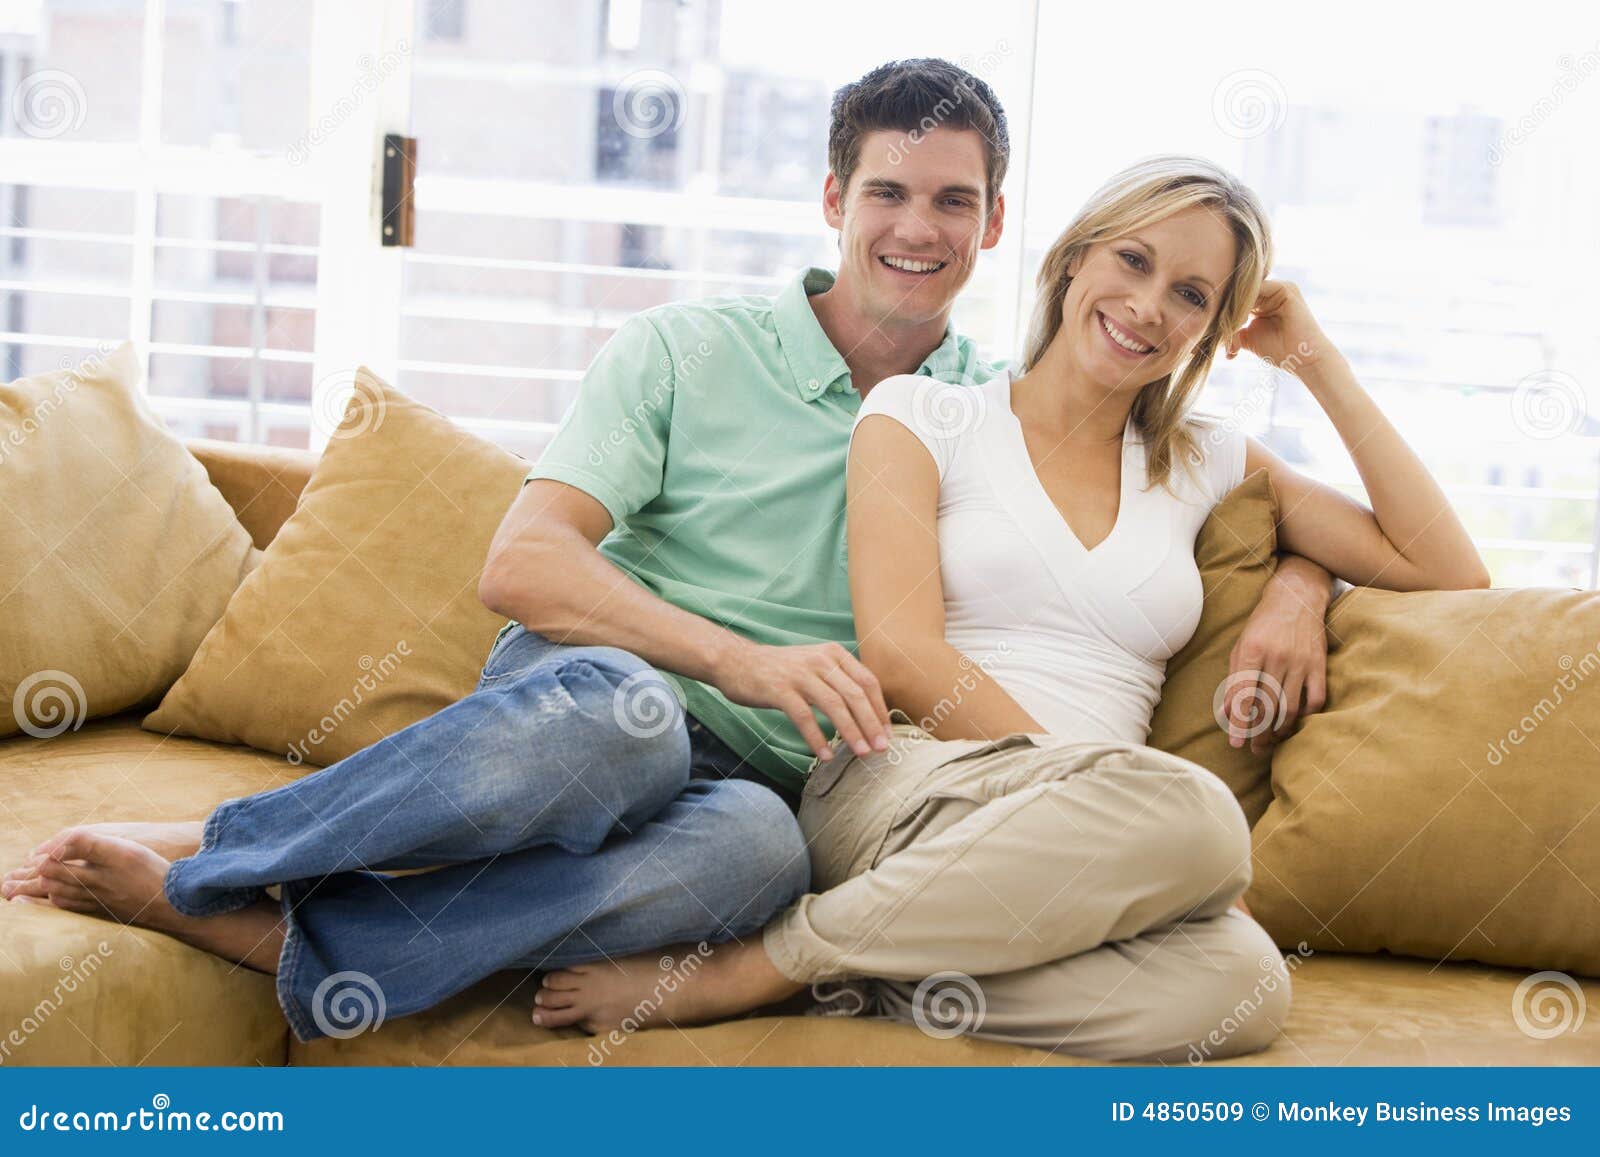 Couple Relaxing At Home Stock Image Image Of Dressed 4850509